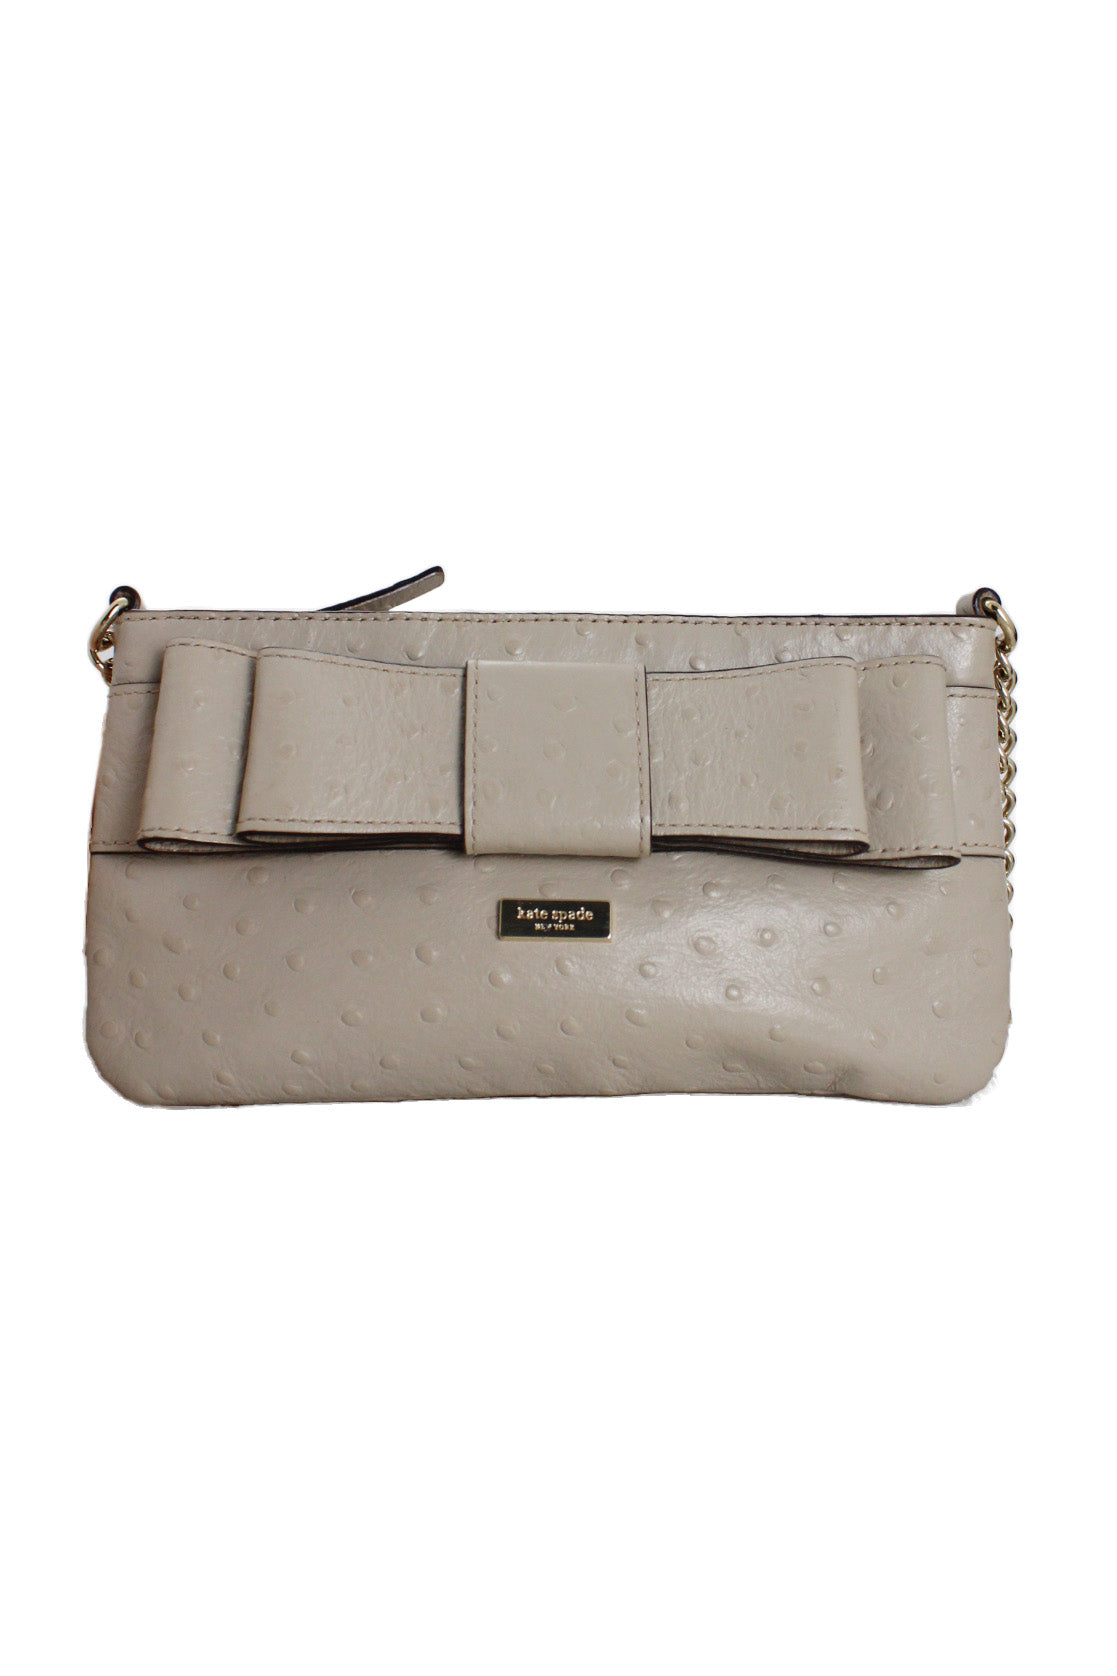 kate spade ivory leather purse with oversized bow detail and ostrich embossed construction. 